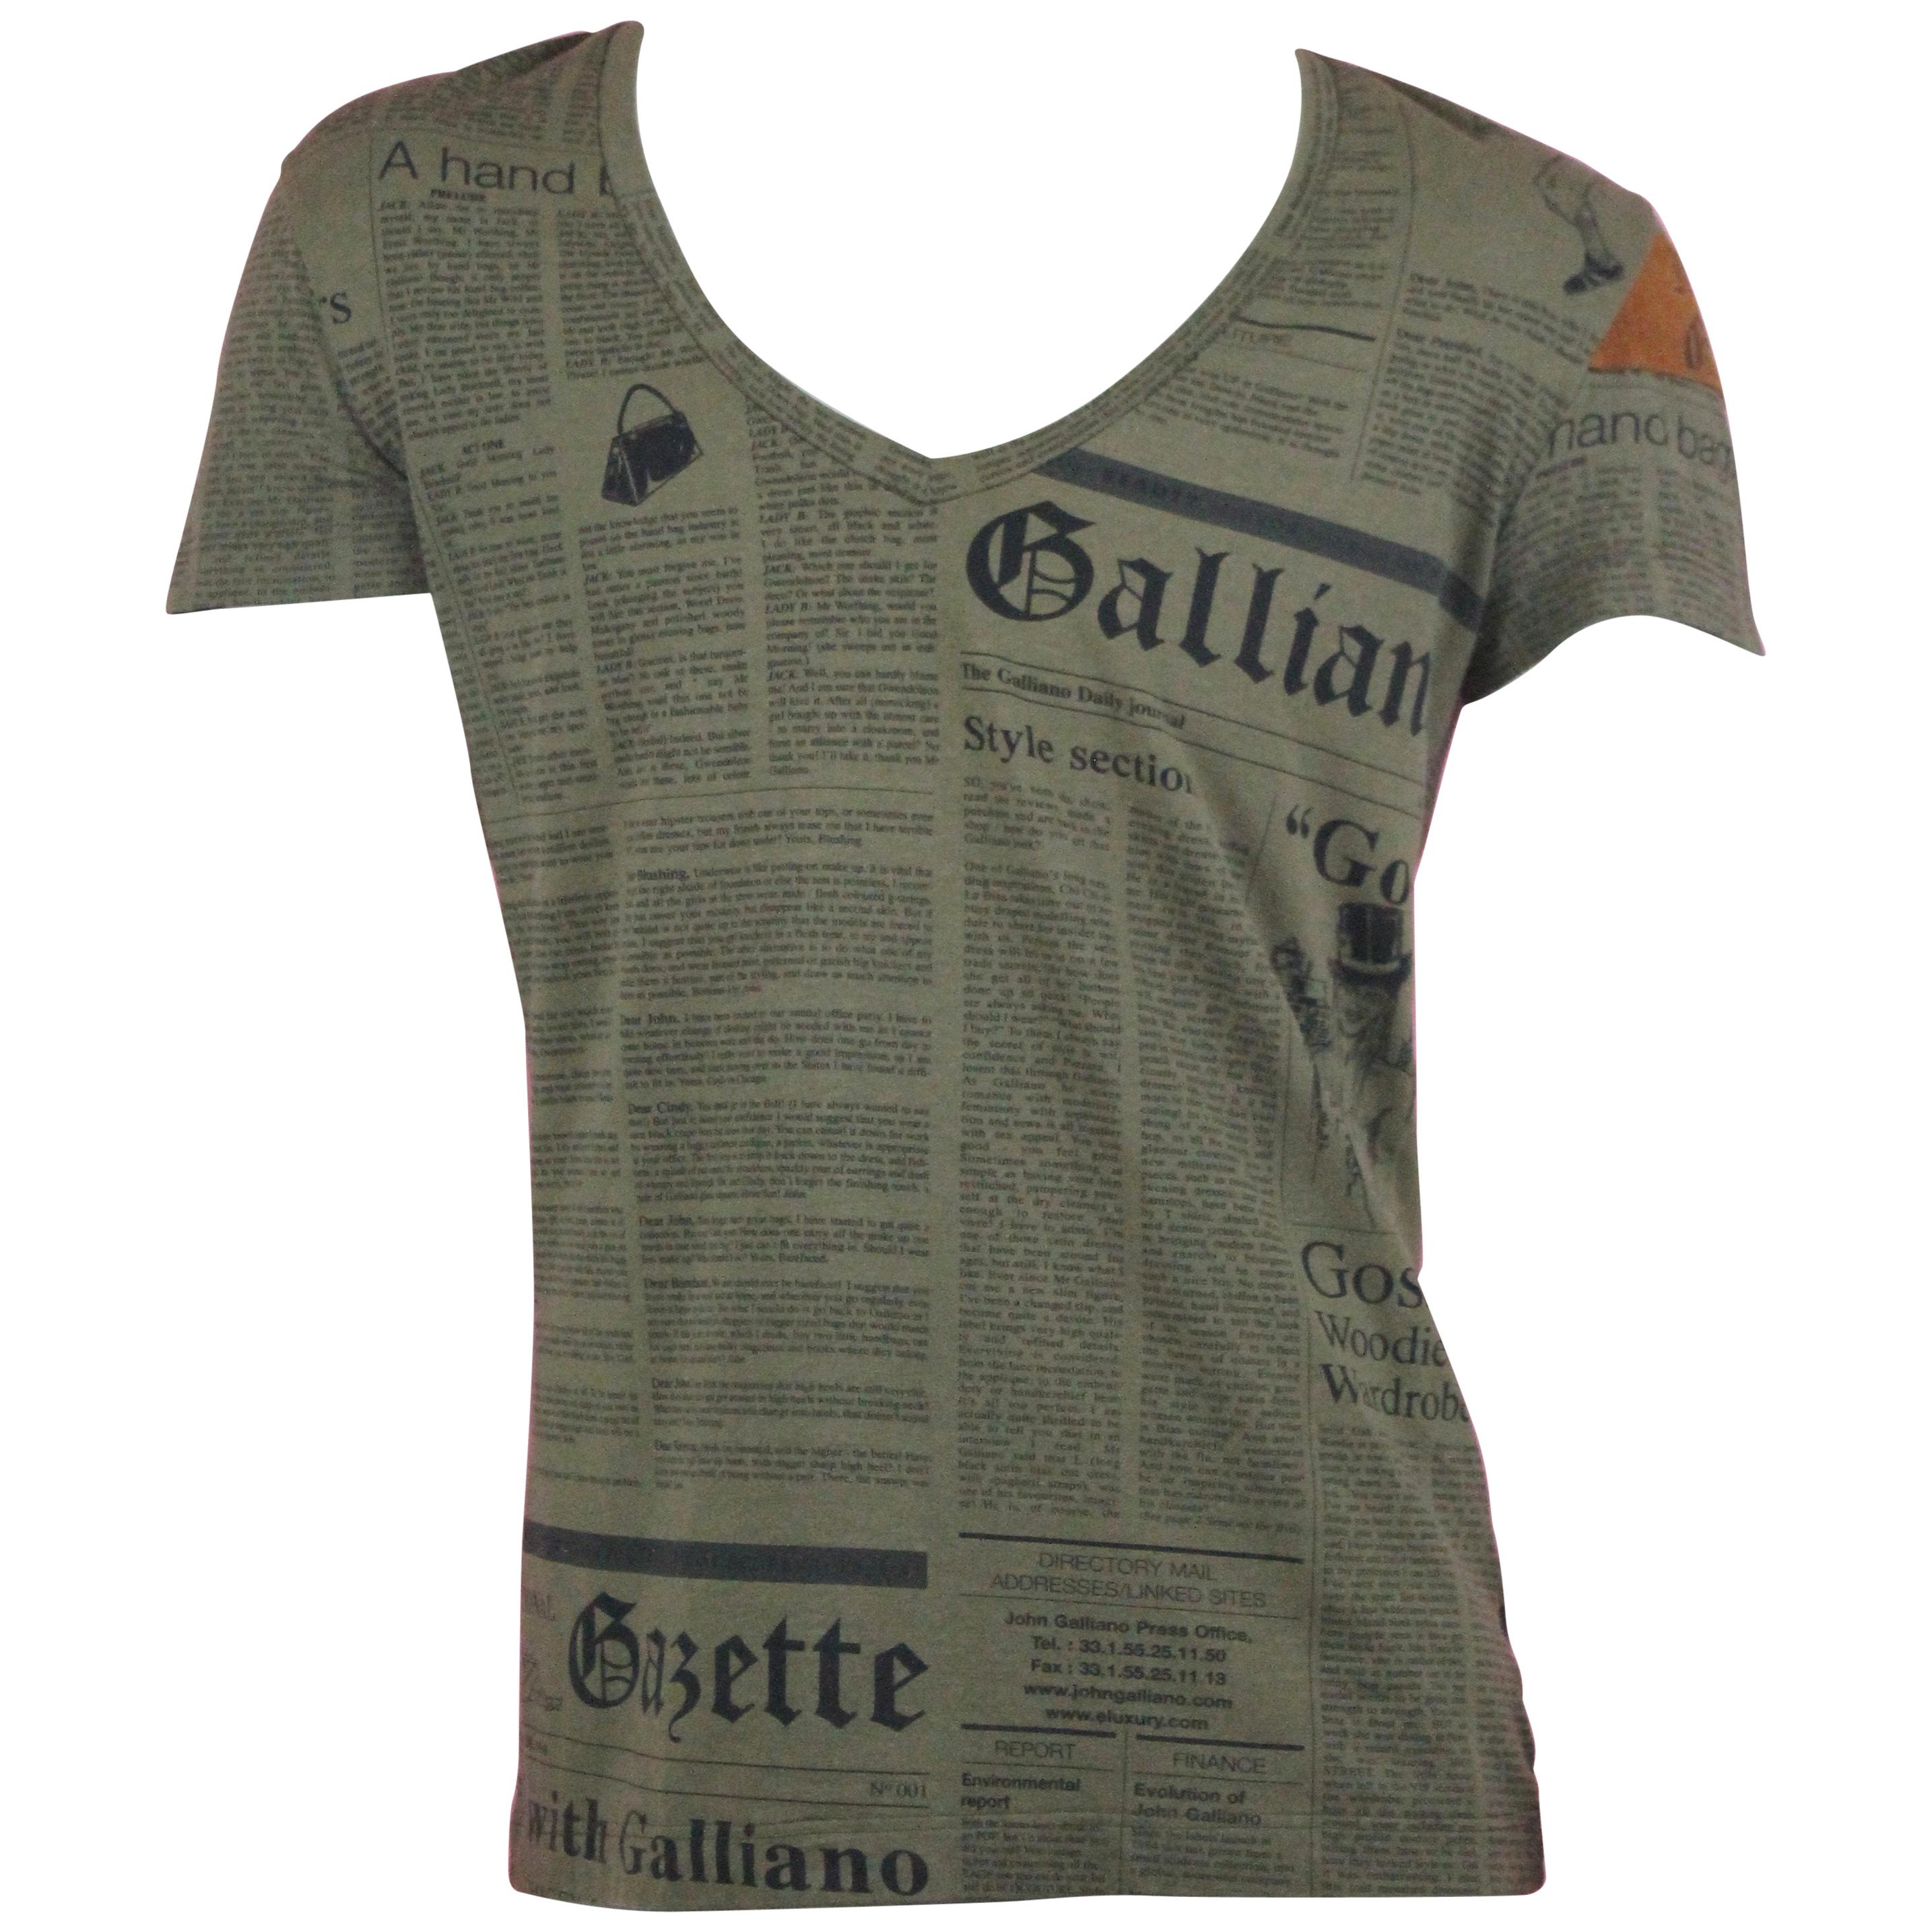 Galliano Gazette Newspaper Print Olive T-Shirt, SS2006, Size S For Sale